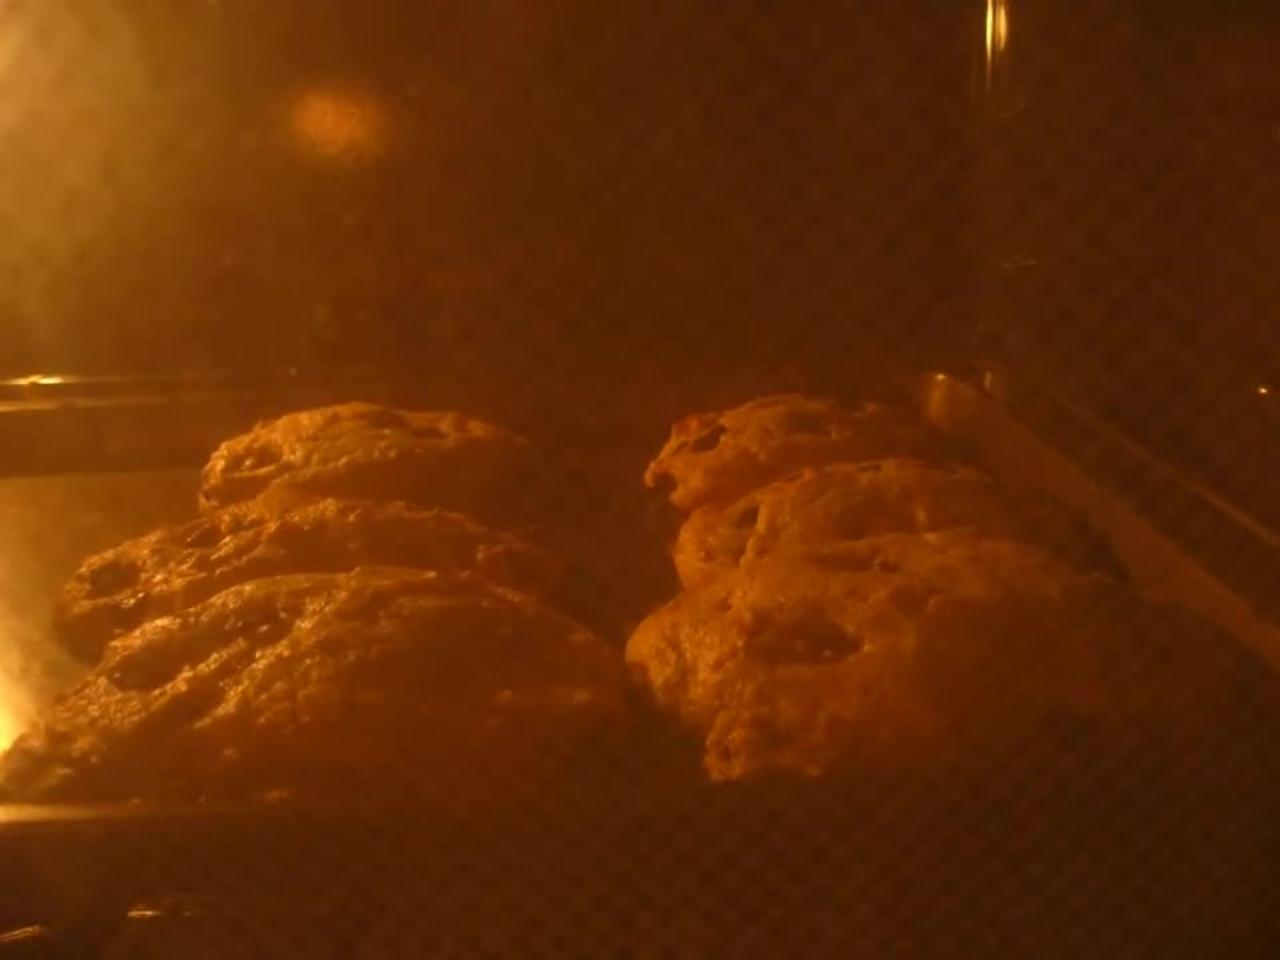 Time Lapse of Cookies Baking